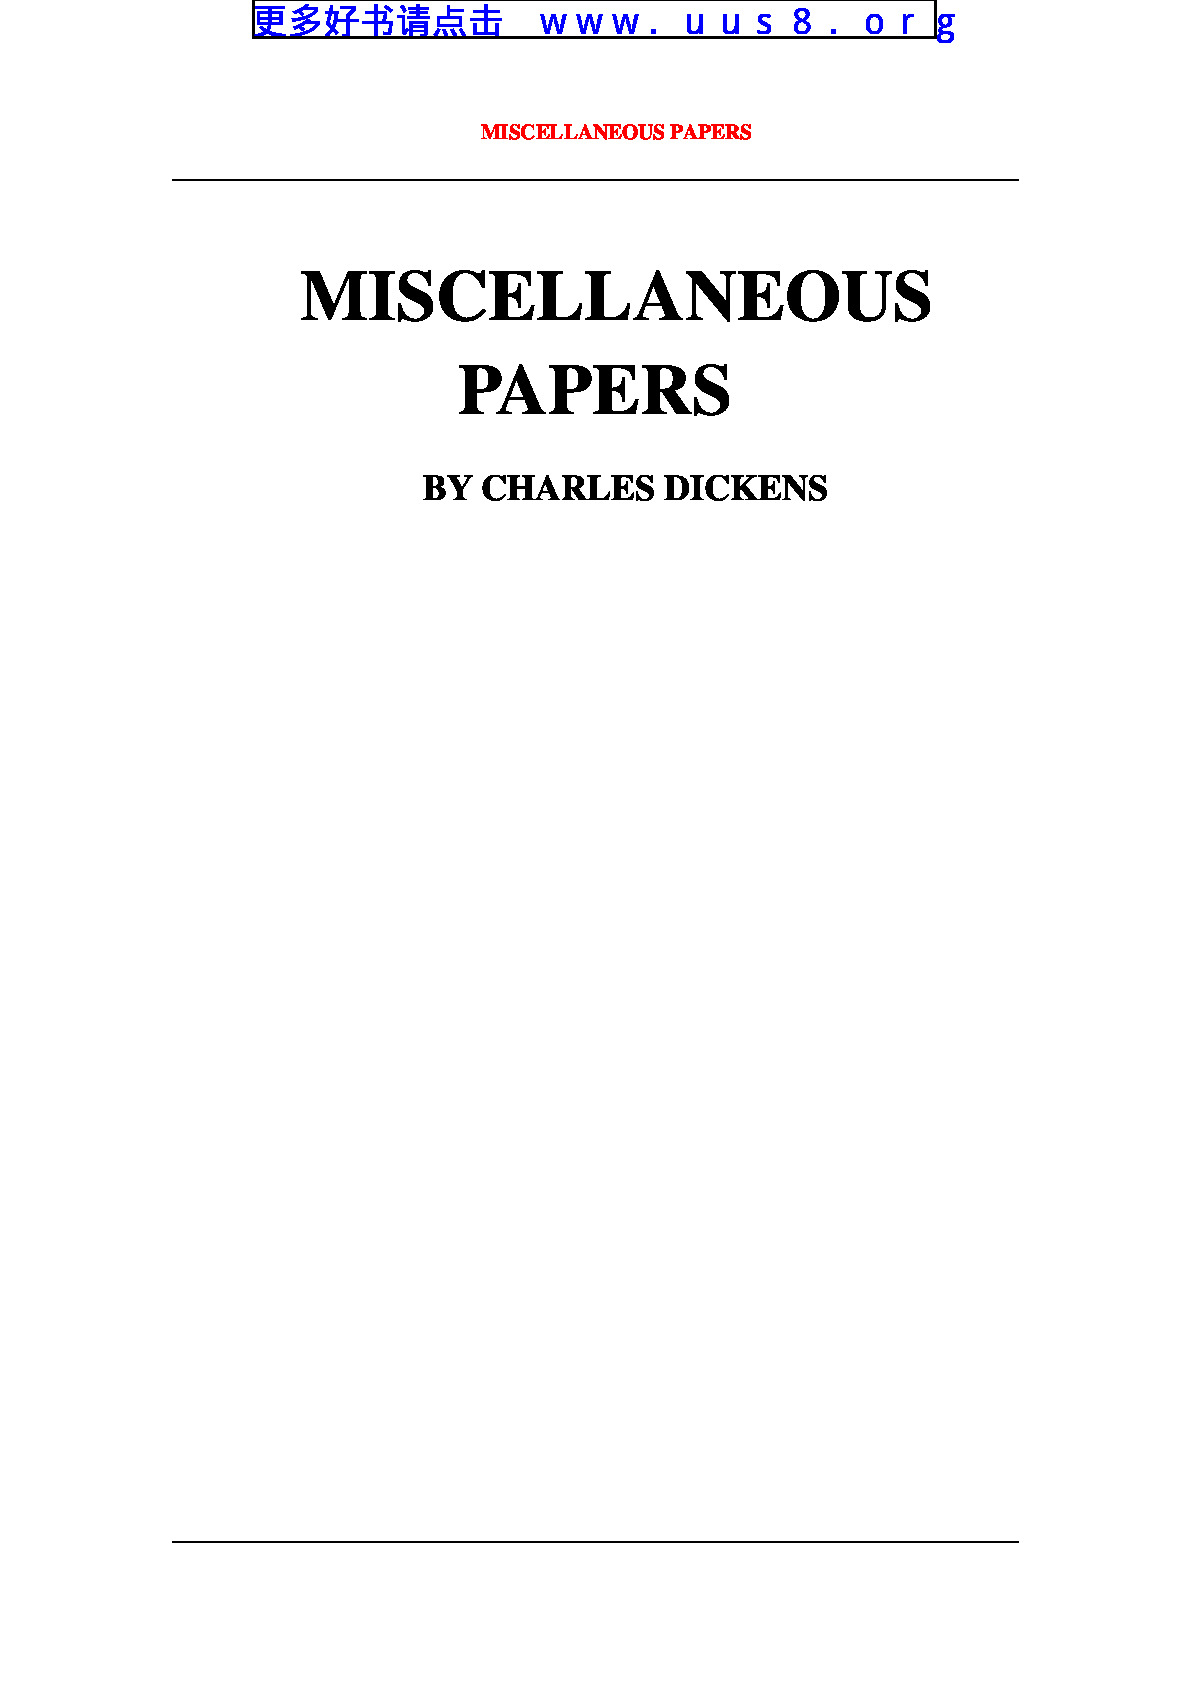 MISCELLANEOUS_PAPERS(各种各样的文件)